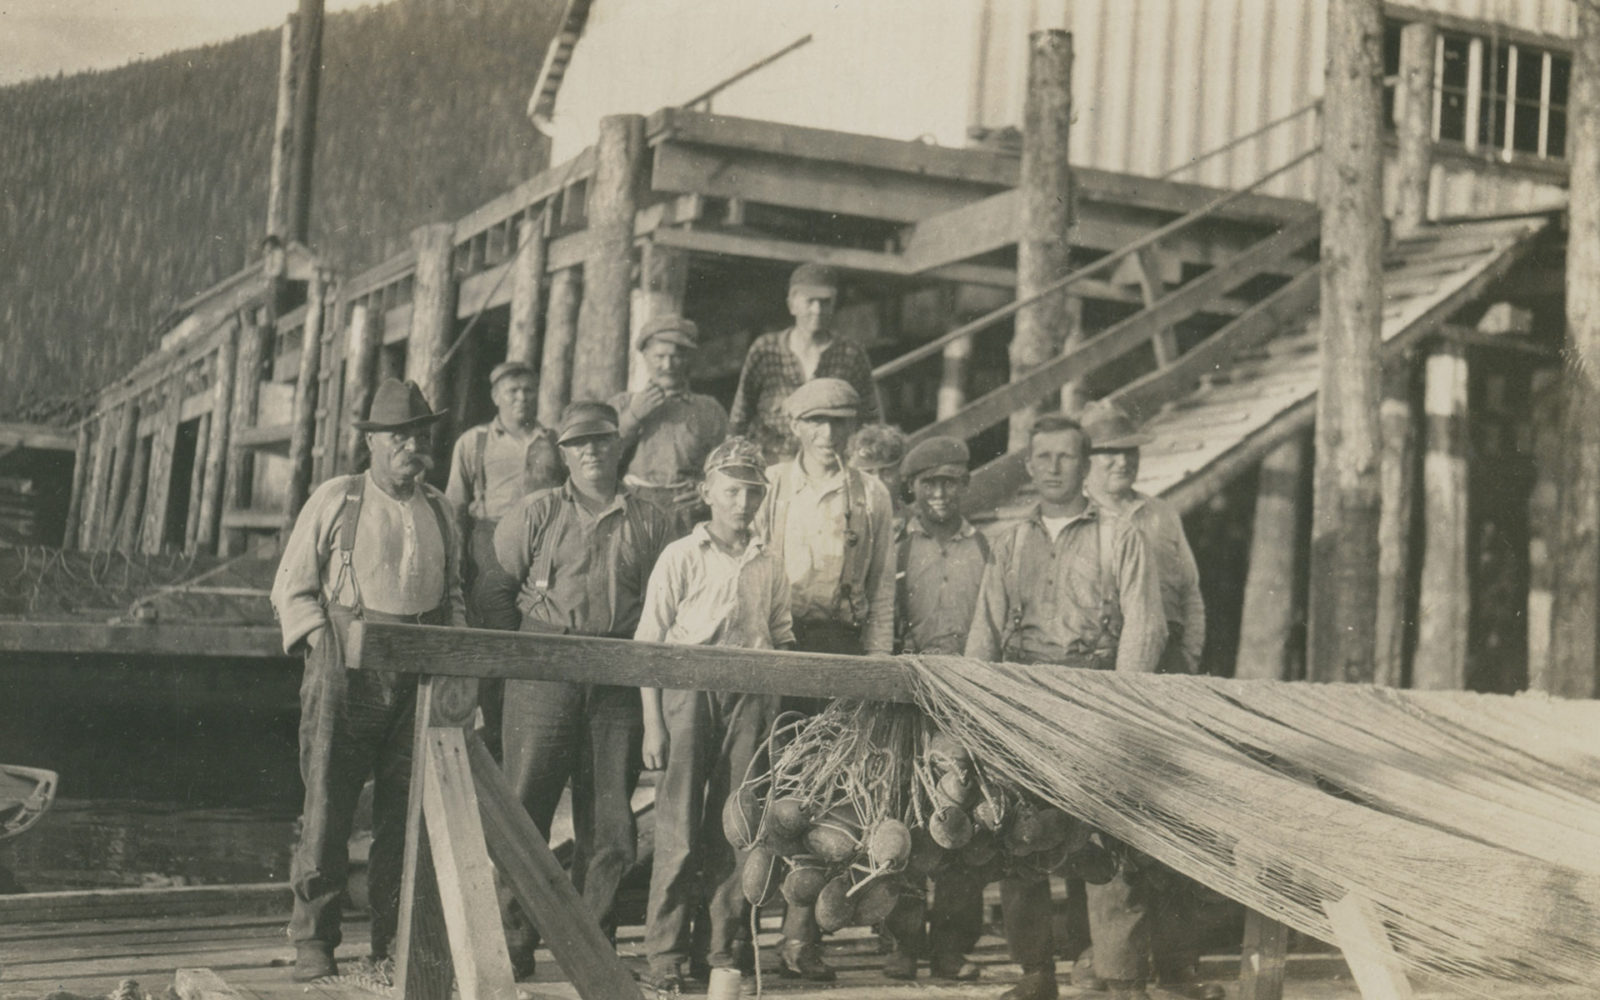 A group of men and boys stand behind a net rack on the wharf of the cannery. A net is hanging on the net rack.